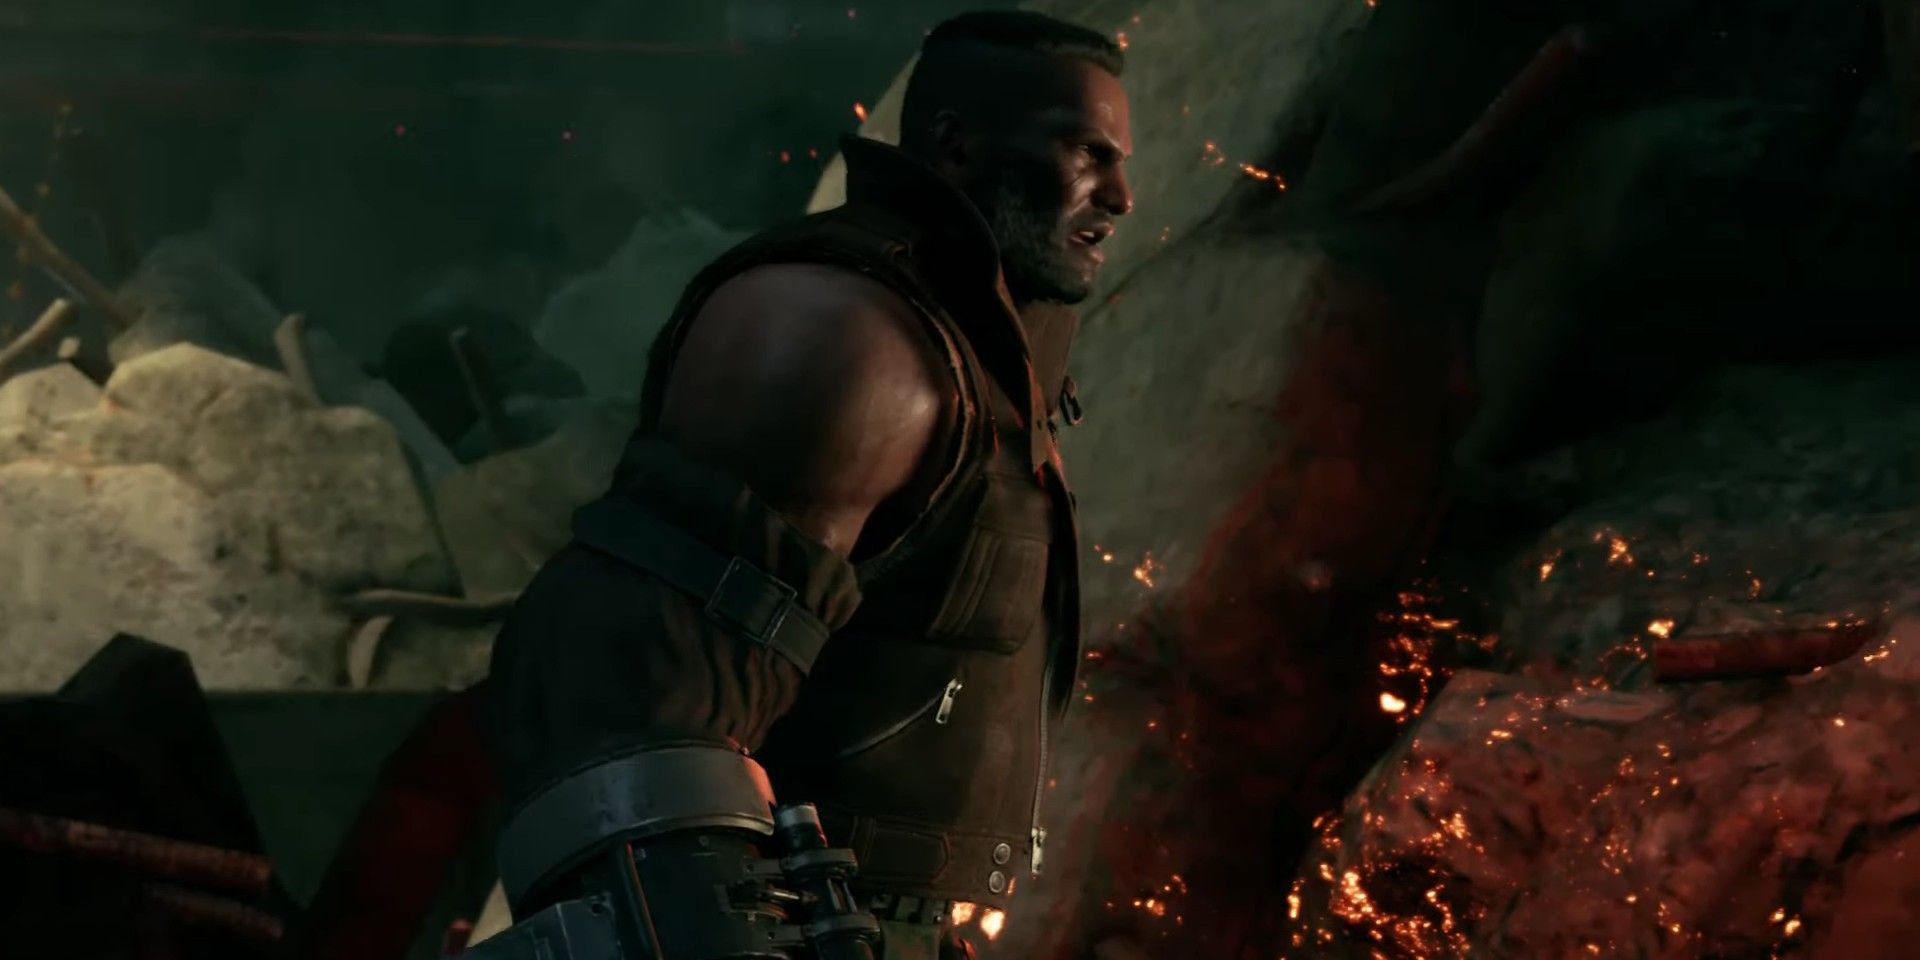 Final Fantasy 7 remake screenshot of Barret standing in Sector 7 rubble